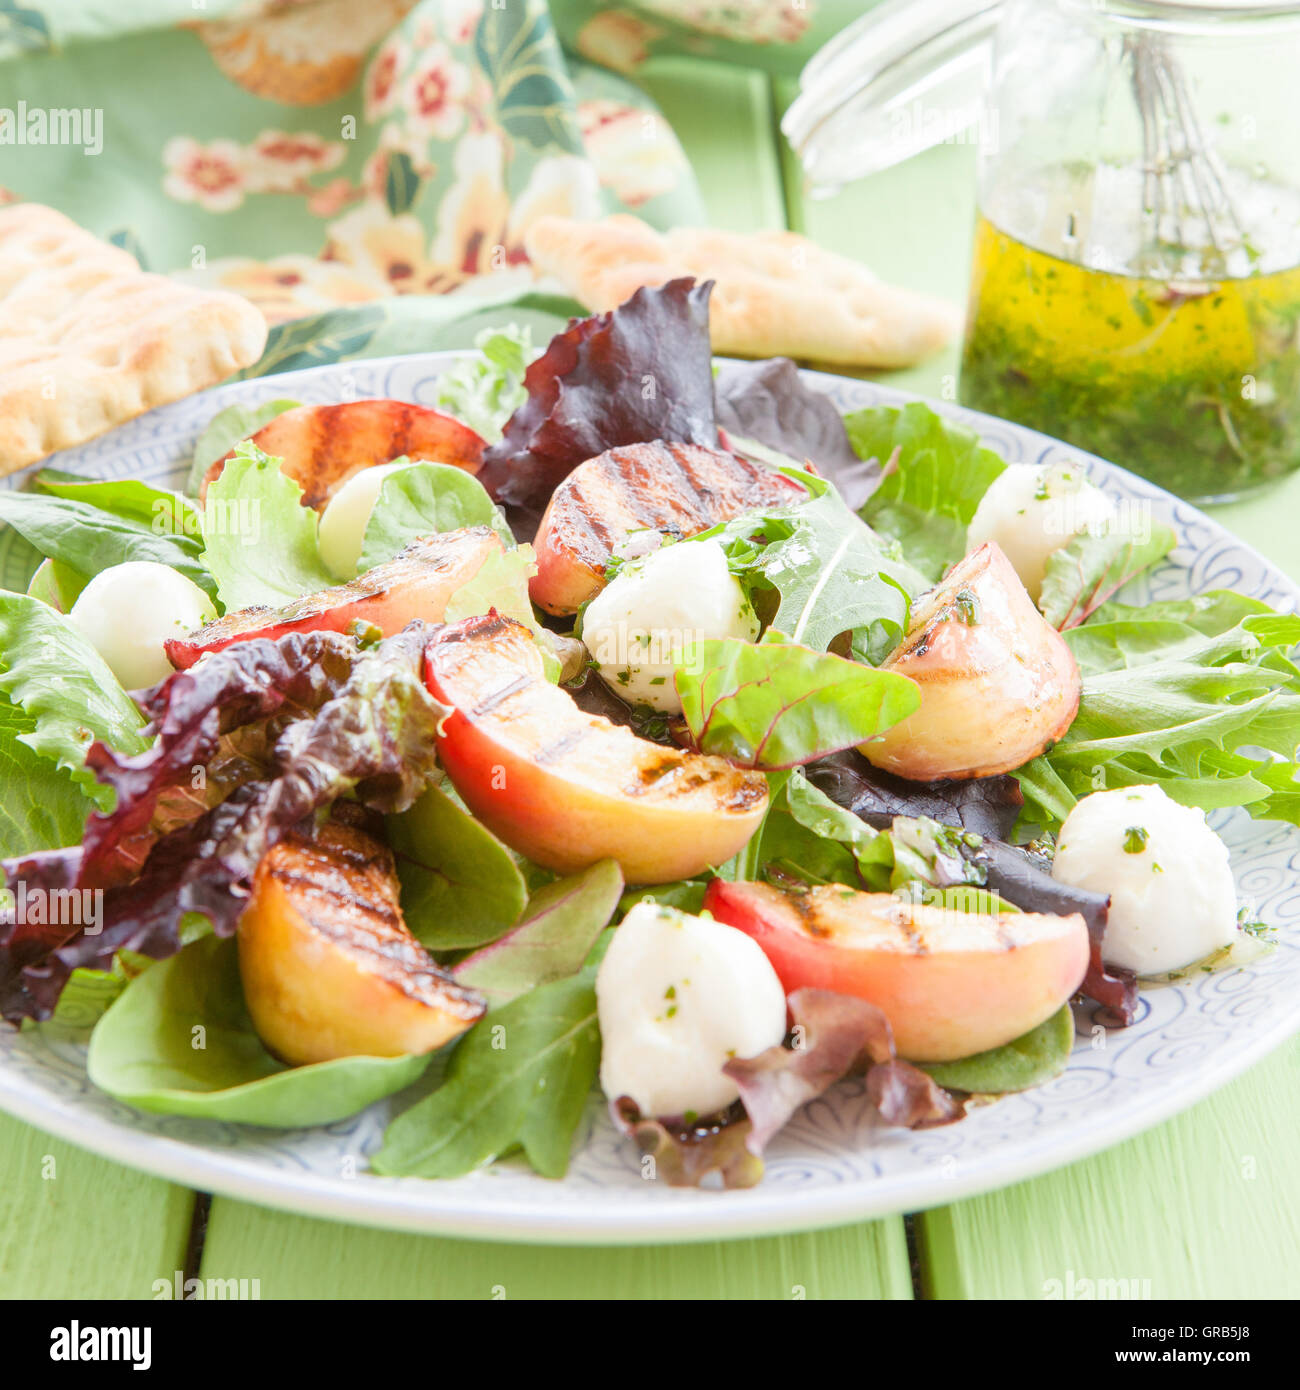 Fresh Salad With Grilled Peaches Stock Photo